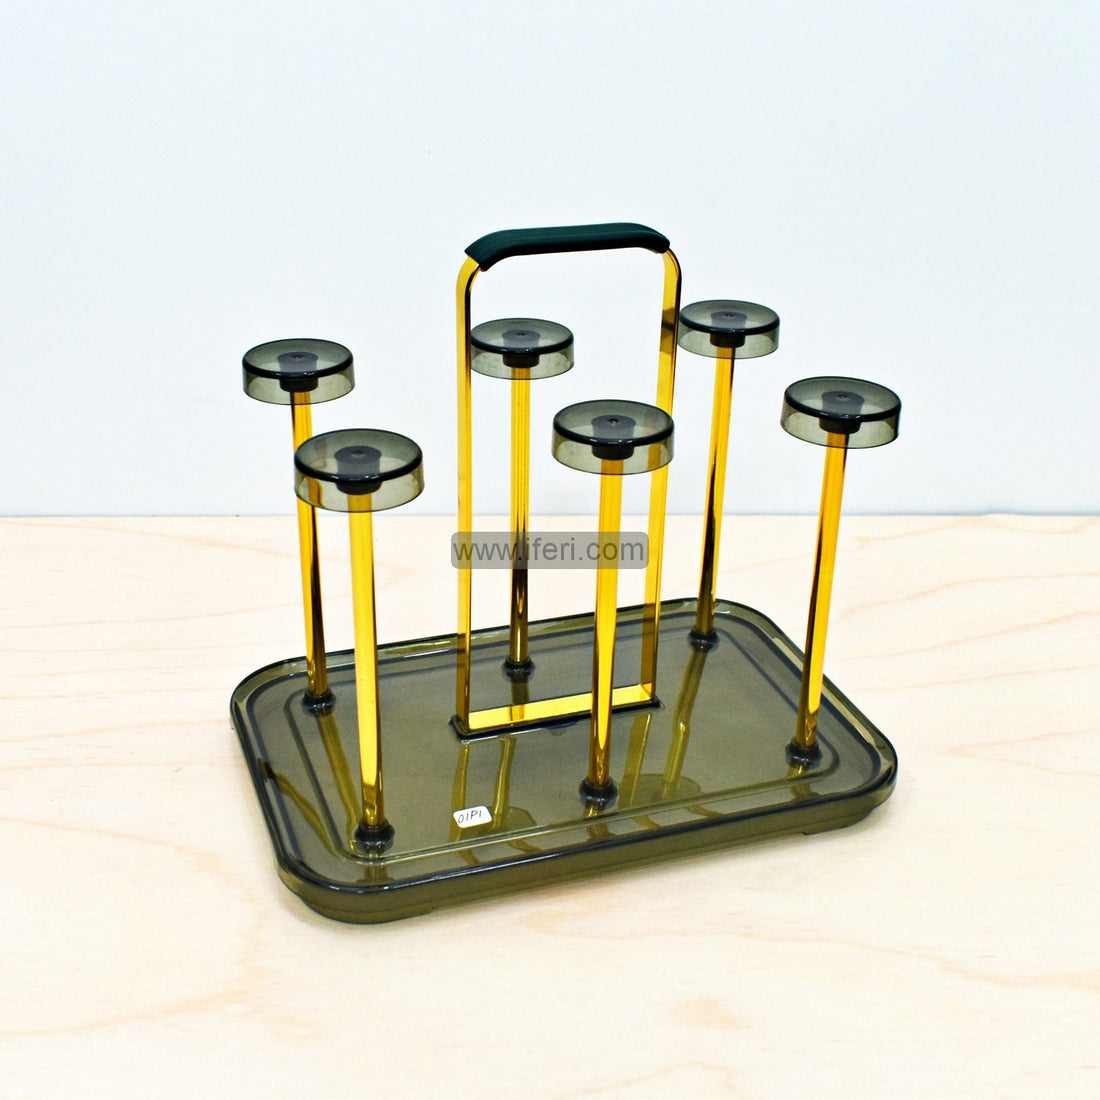 Buy Metal & Plastic Glass Stand through online from iferi.com in Bangladesh